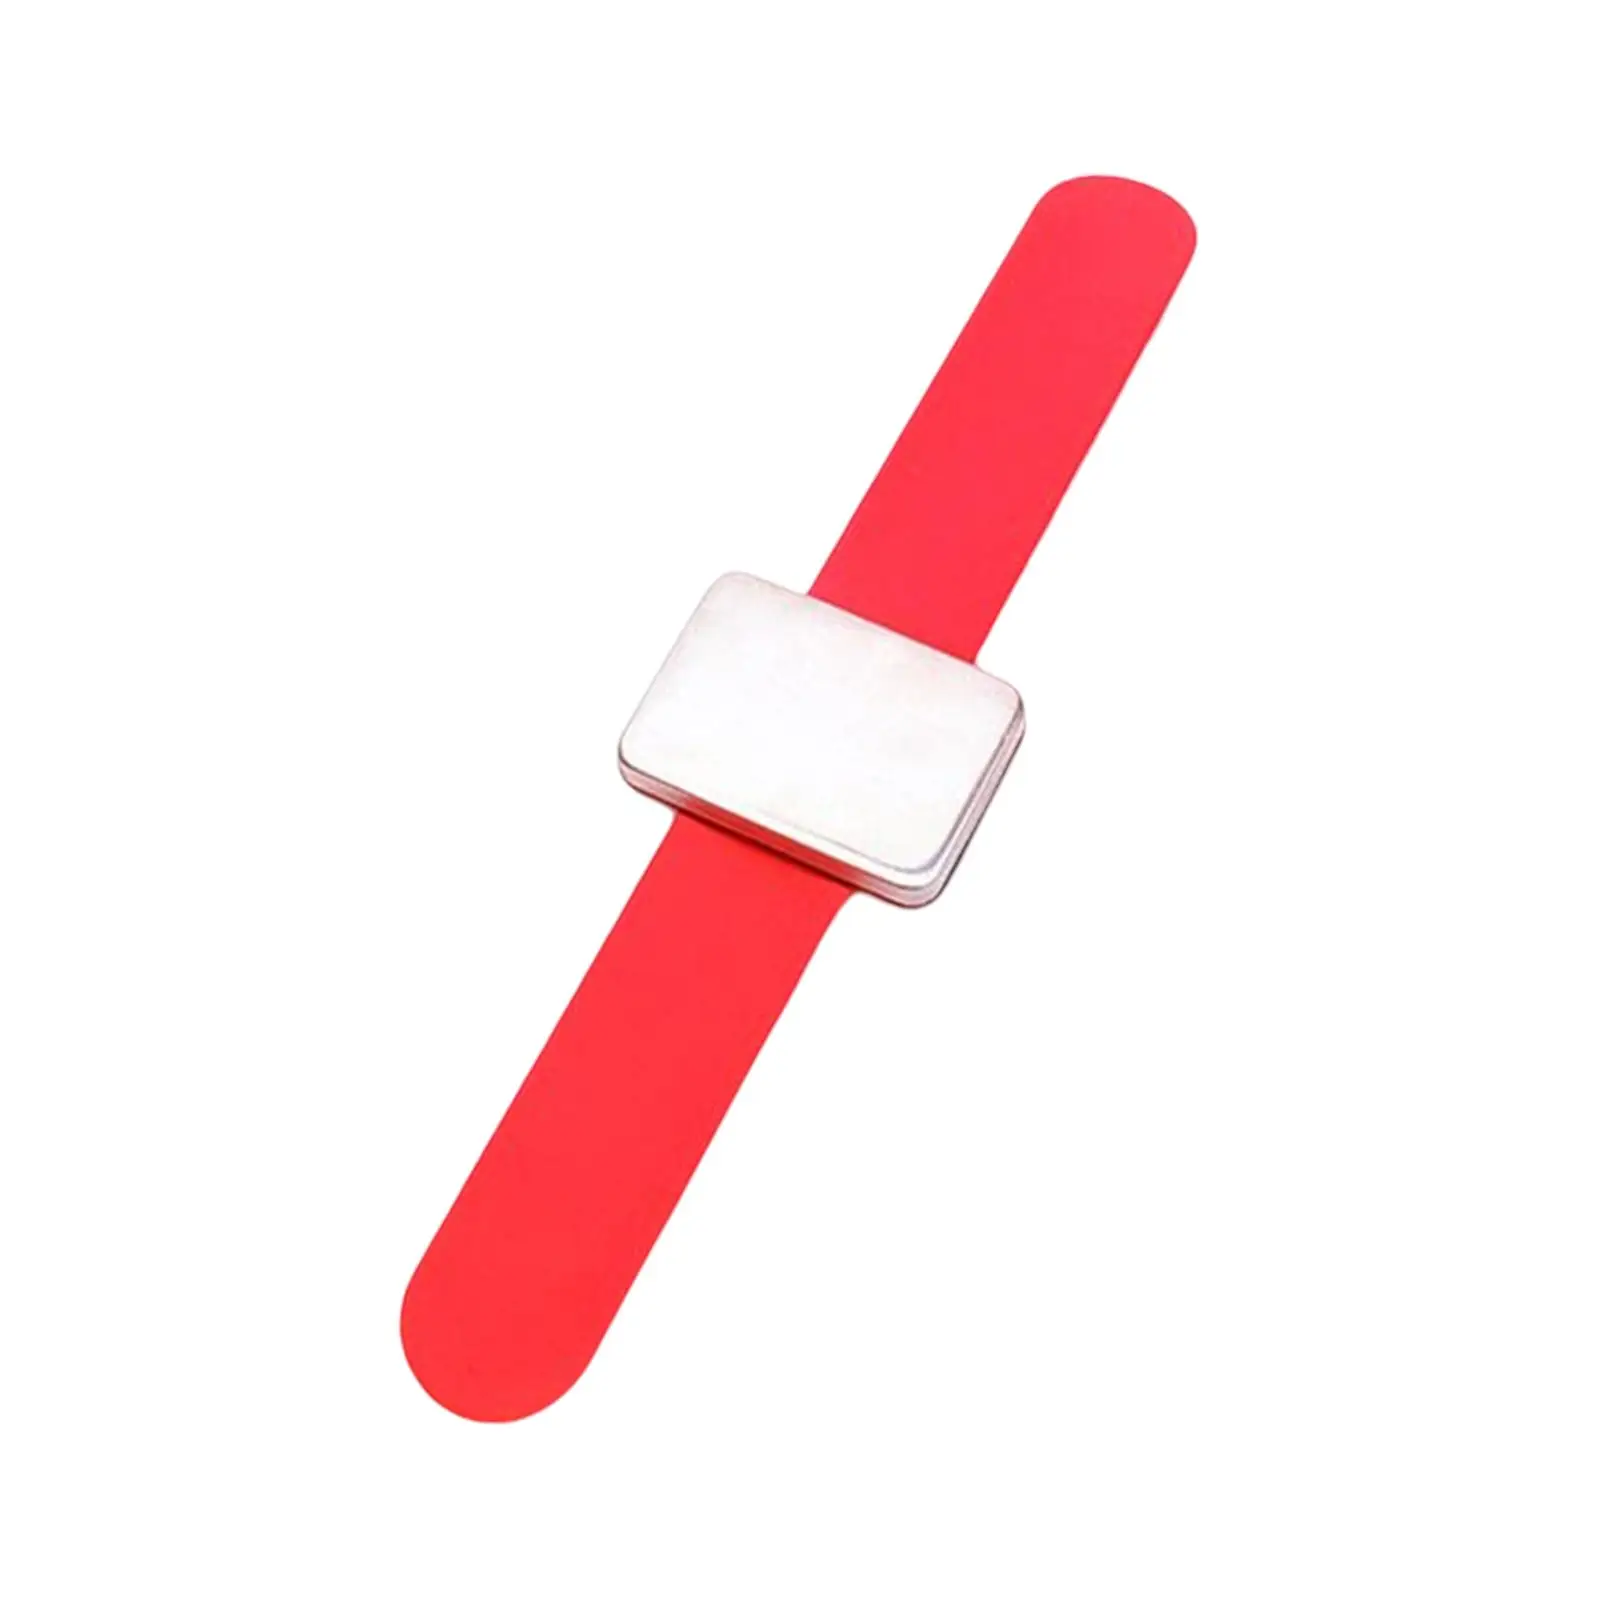 Magnetic Silicone Wrist Strap Accessory for Barber Hairdressing Styling Tools Hair Clip Holder Salon Tool Pin Cushion Holder